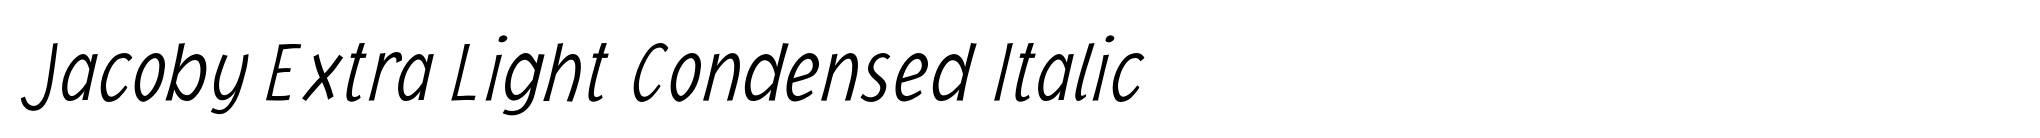 Jacoby Extra Light Condensed Italic image